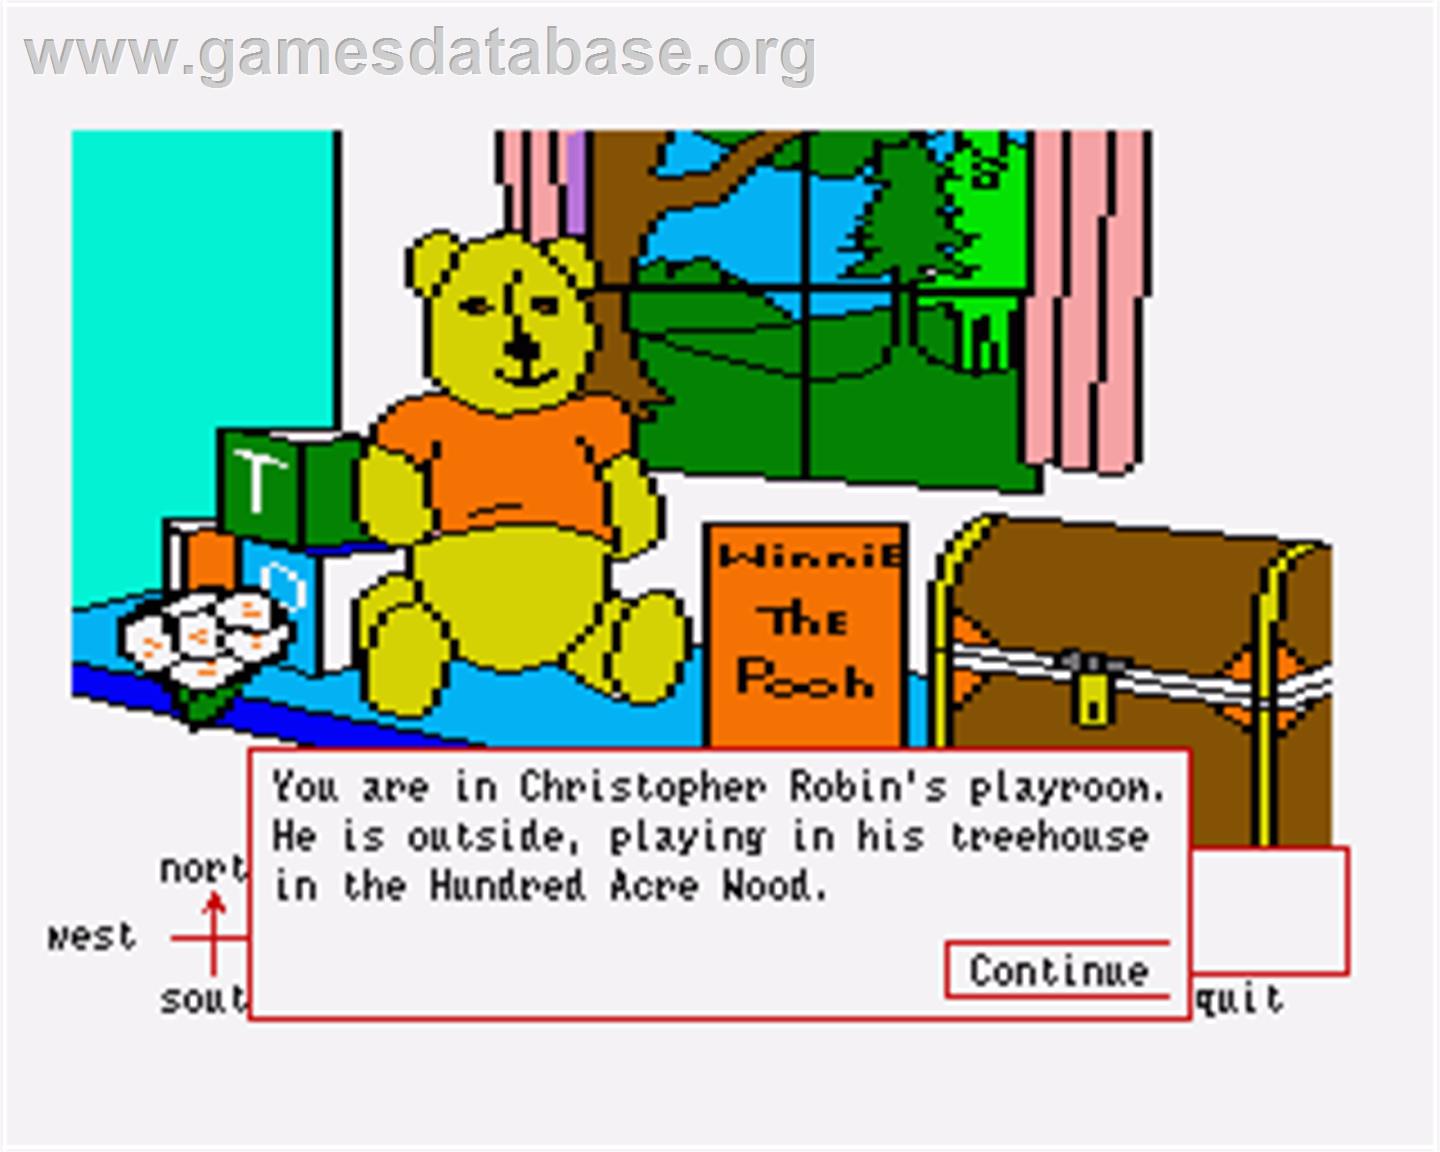 Winnie the Pooh in the Hundred Acre Wood - Commodore Amiga - Artwork - In Game